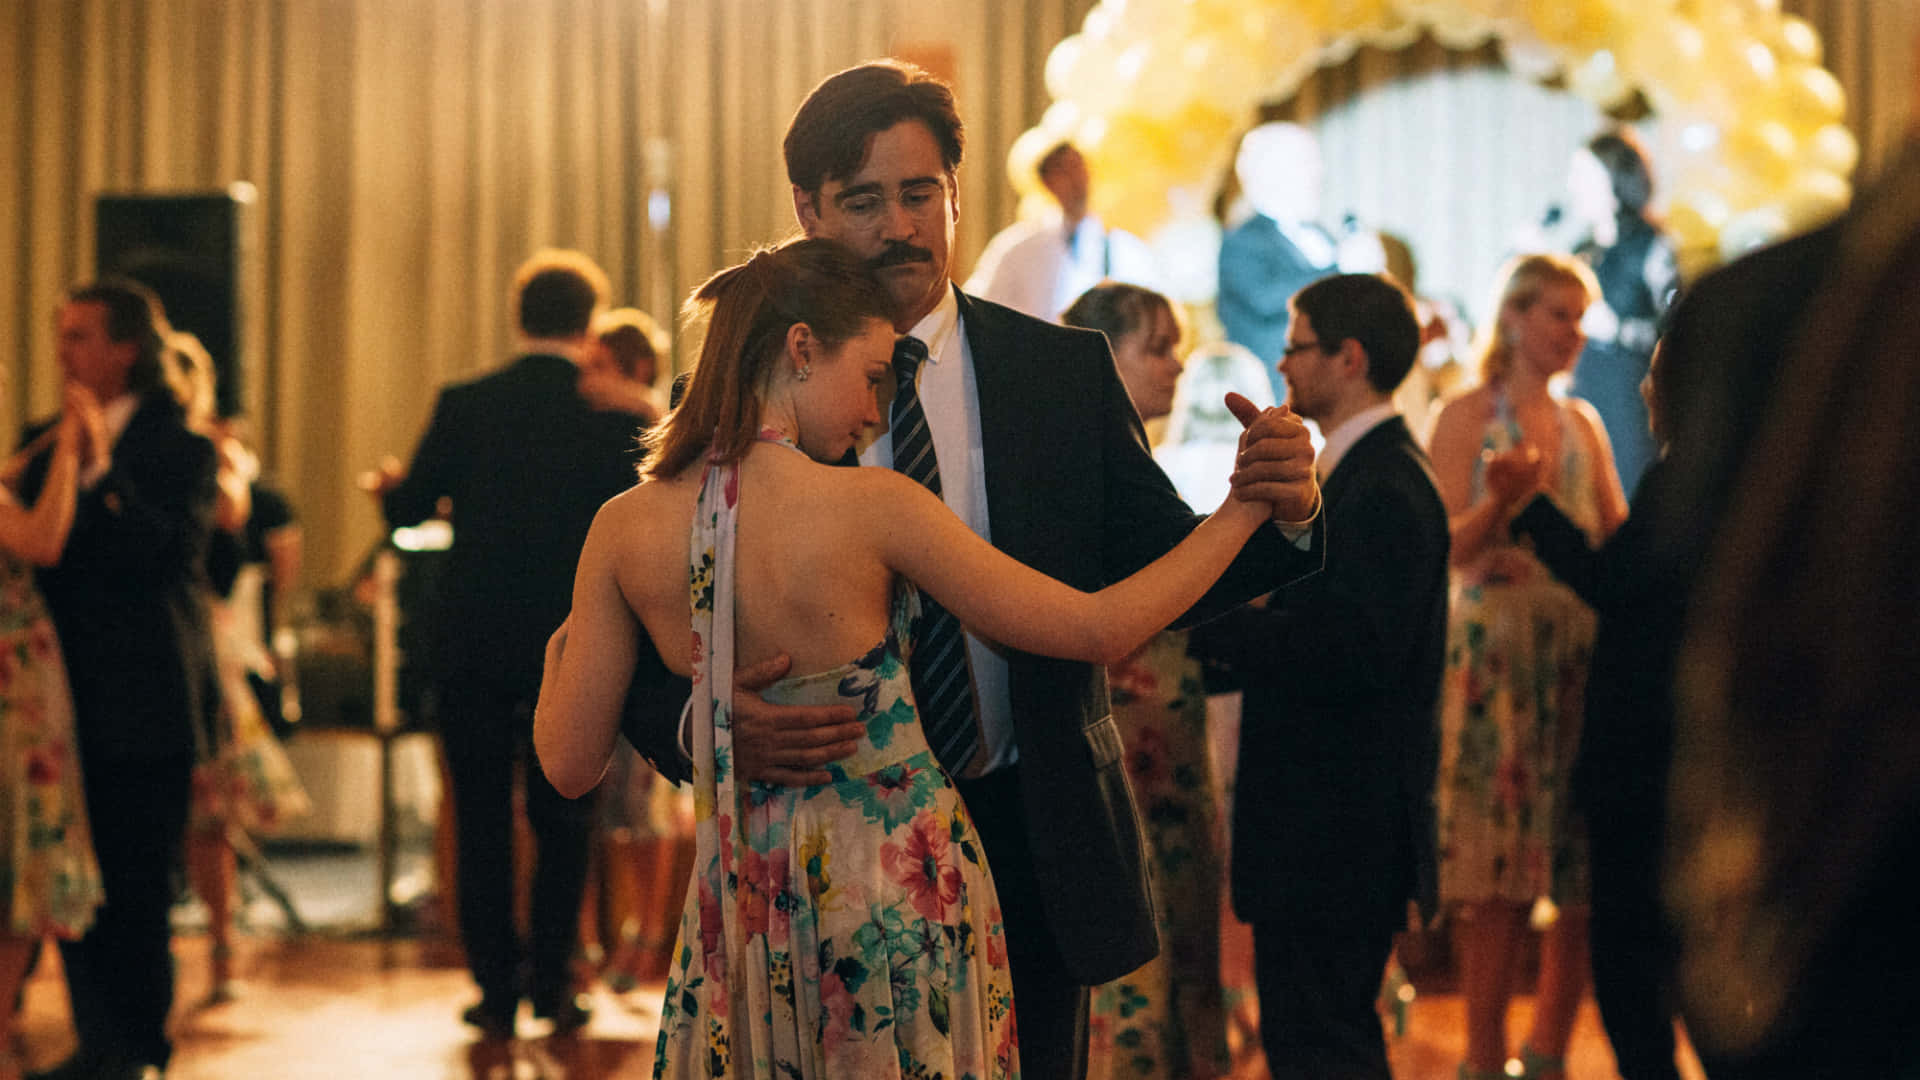 A Still From The Lobster Featuring Colin Farrell Wallpaper